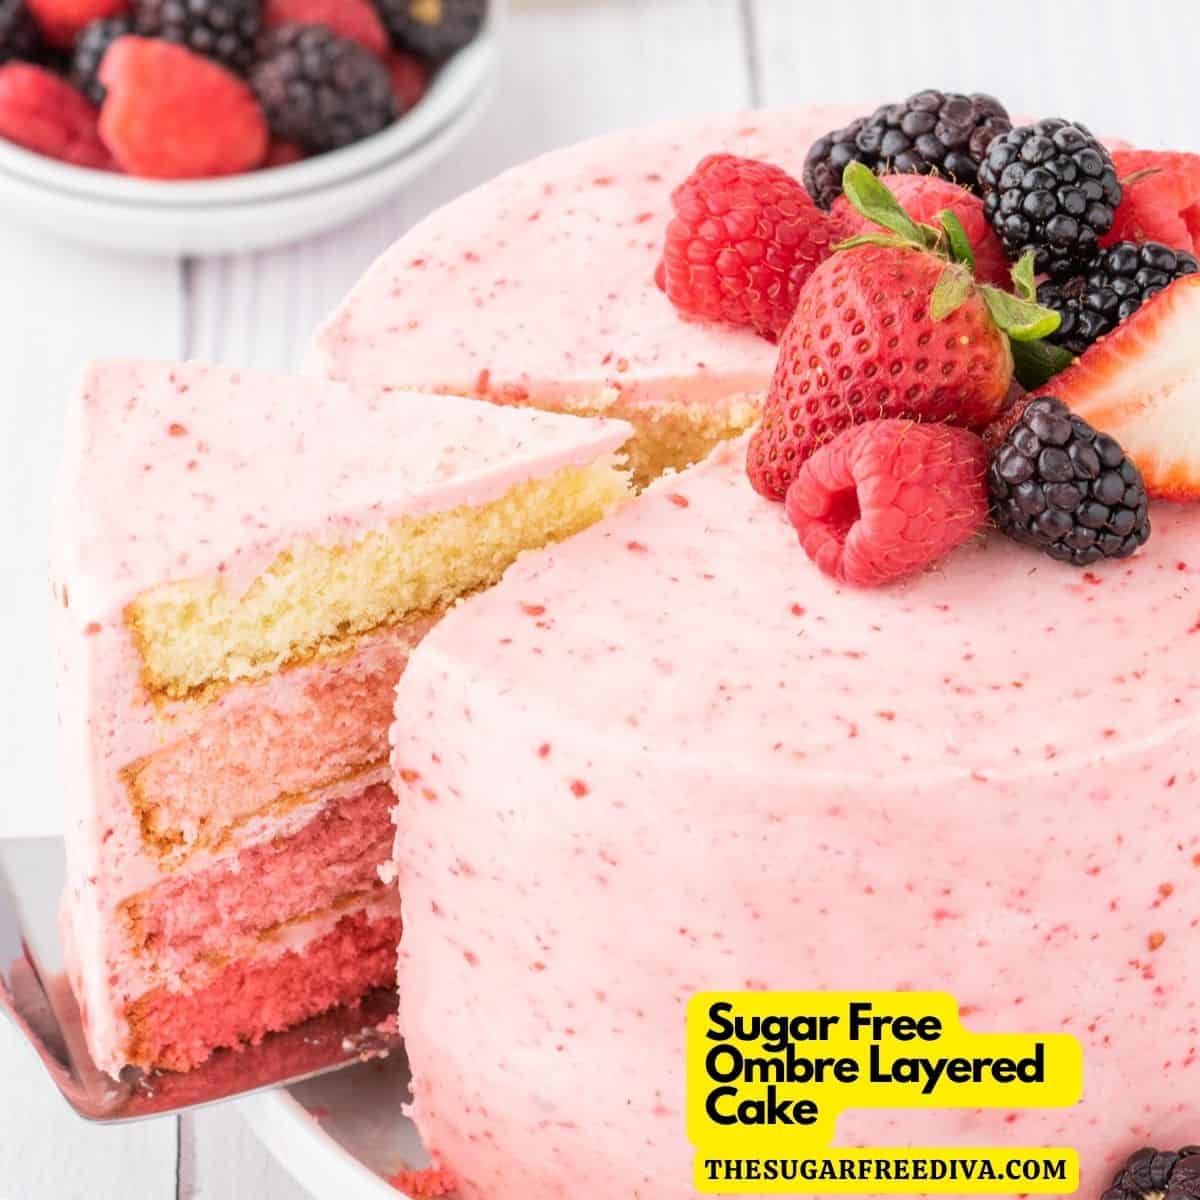 Sugar Free Ombre Layered Cake, a moist and delicious layered dessert recipe with berry frosting made with no added sugar. 